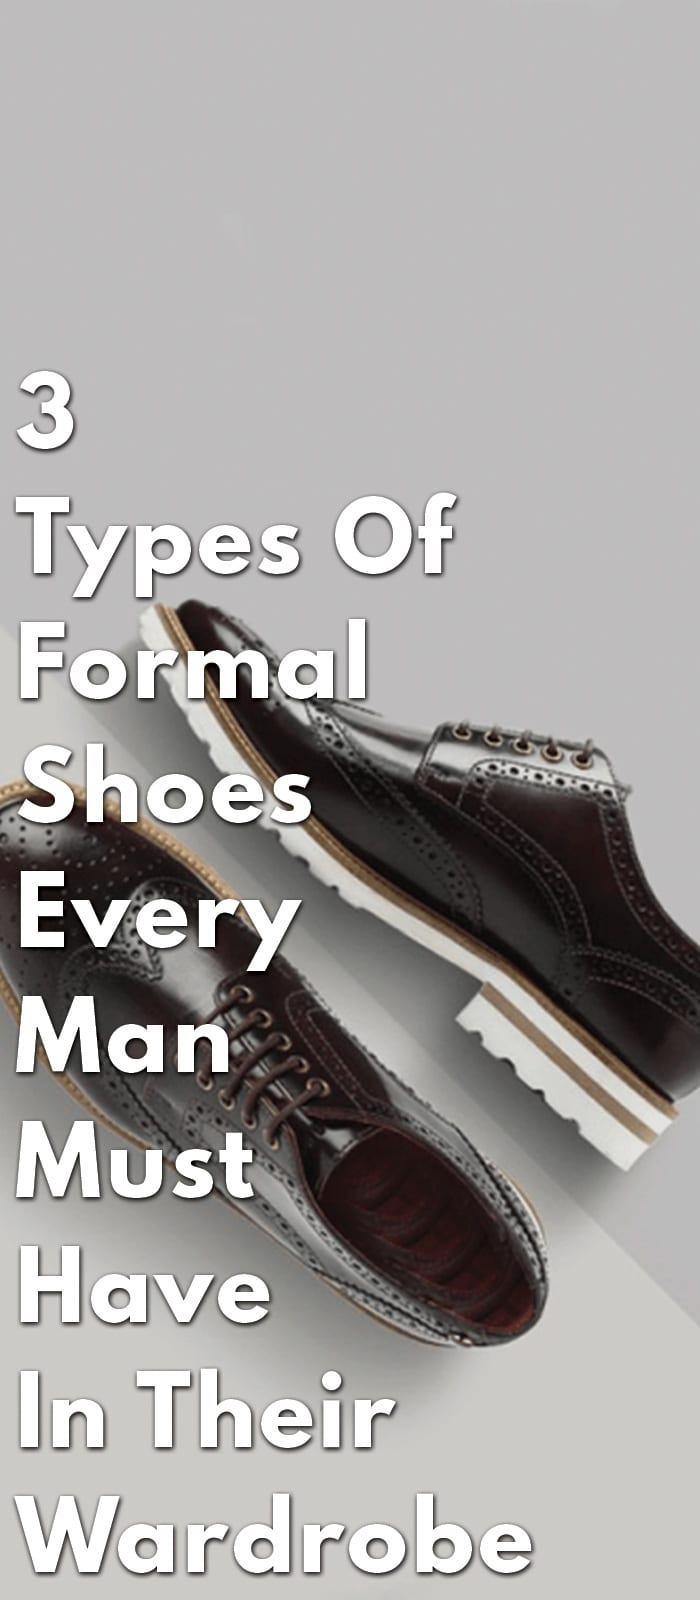 3-Types-Of-Formal-Shoes-Every-Man-Must-Have-In-Their-Wardrobe